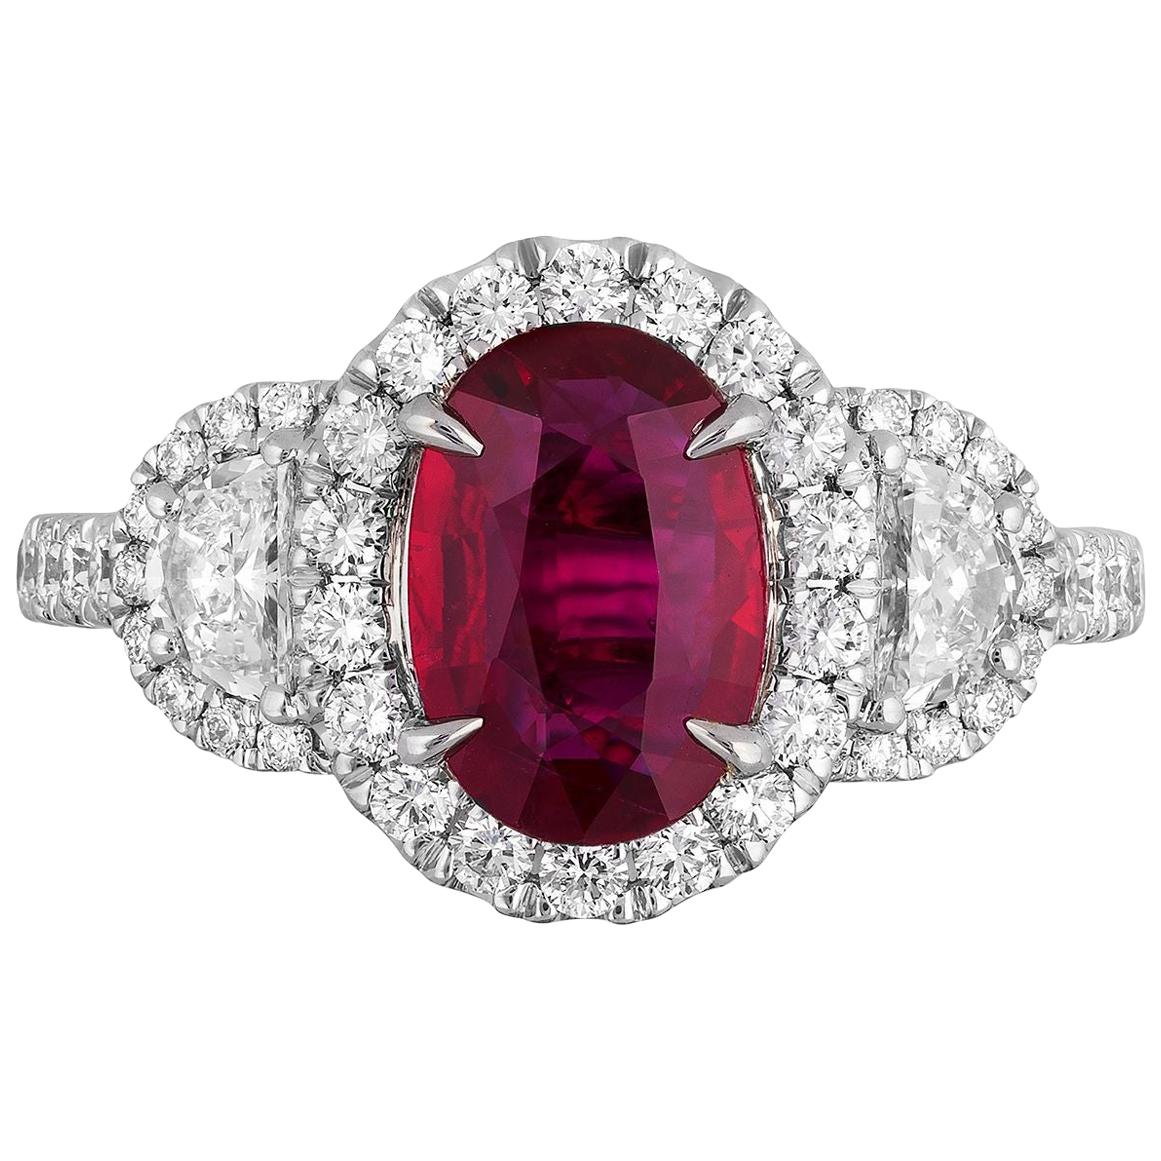 CDC Certified 1.52 Carat Mozambique Ruby Diamond Ring